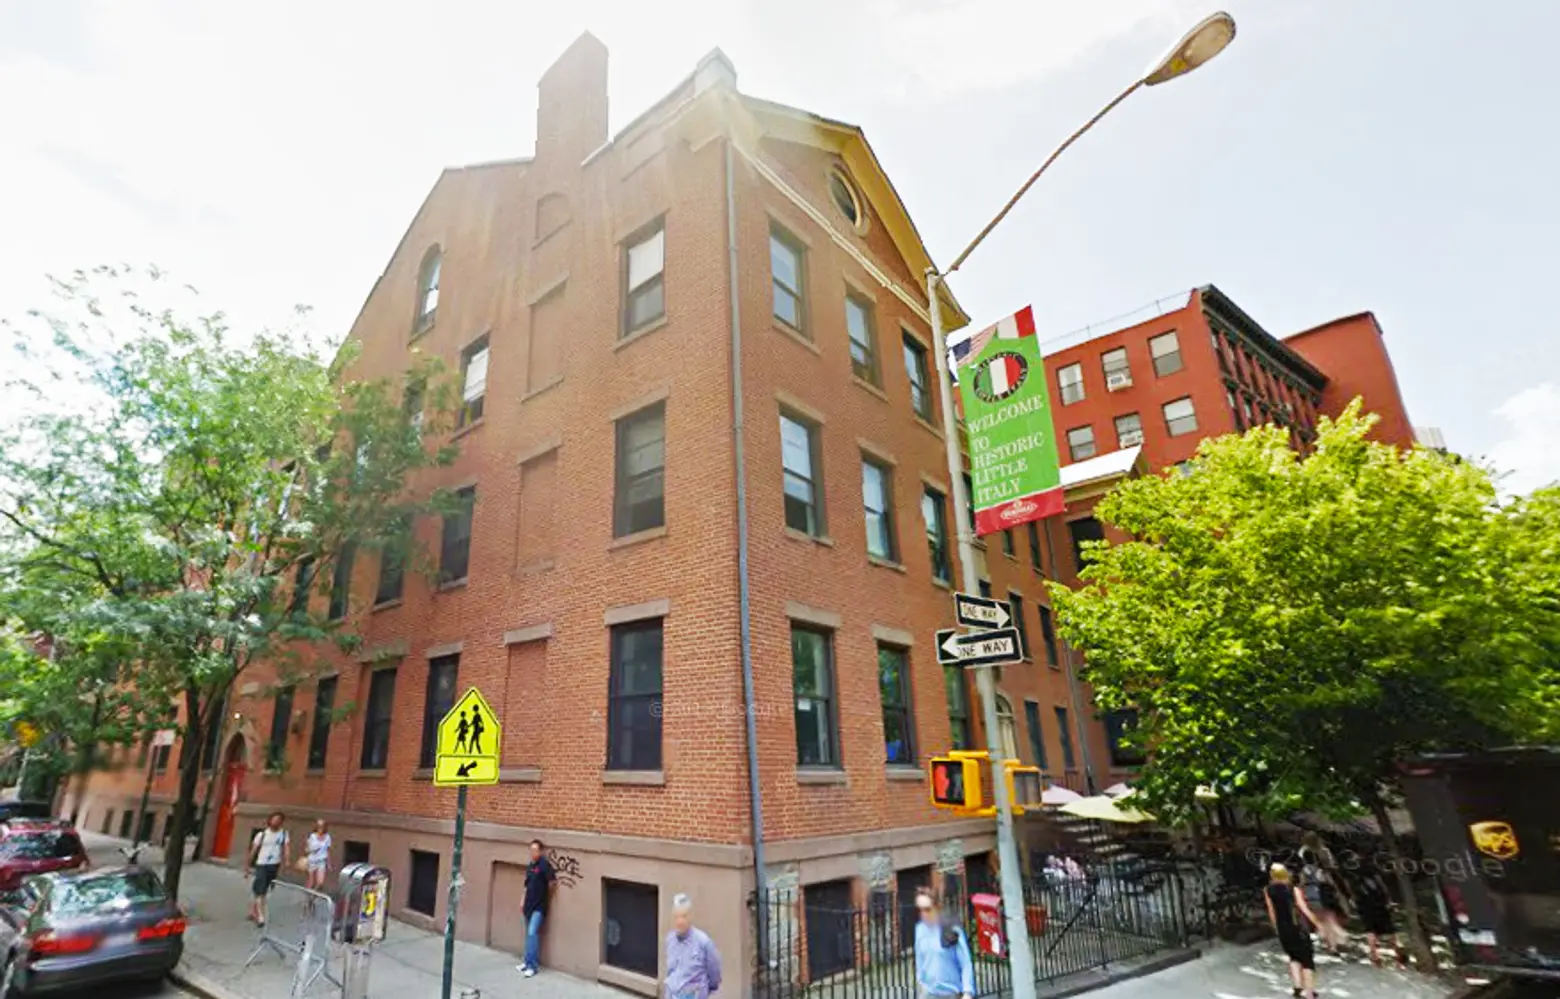 Archdiocese of New York Sells off St. Patrick’s School in Little Italy for $32M, Makes Way for Condos